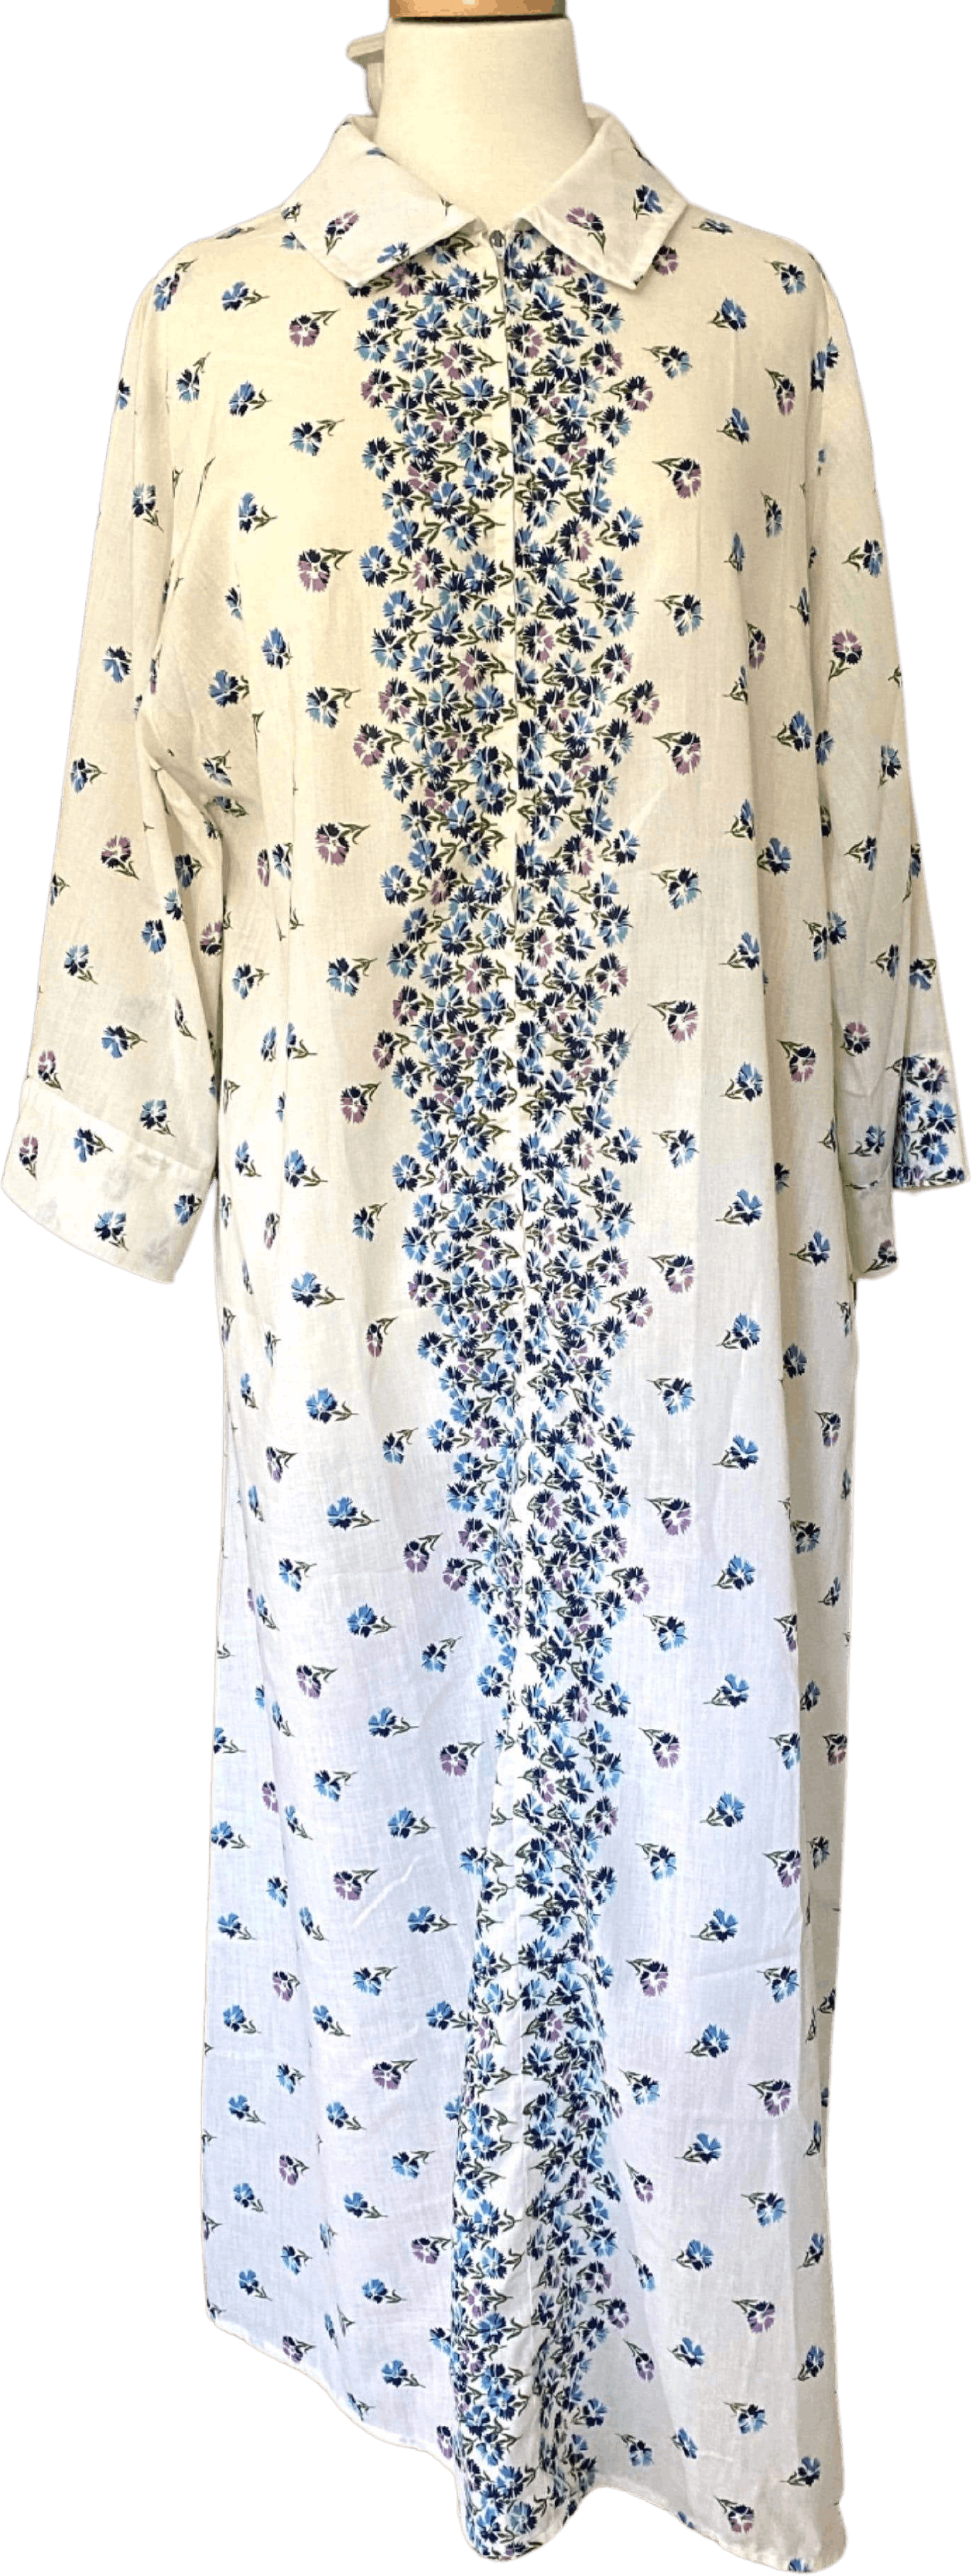 Vintage 50's Floral Print nightgown , housedress | Shop THRILLING